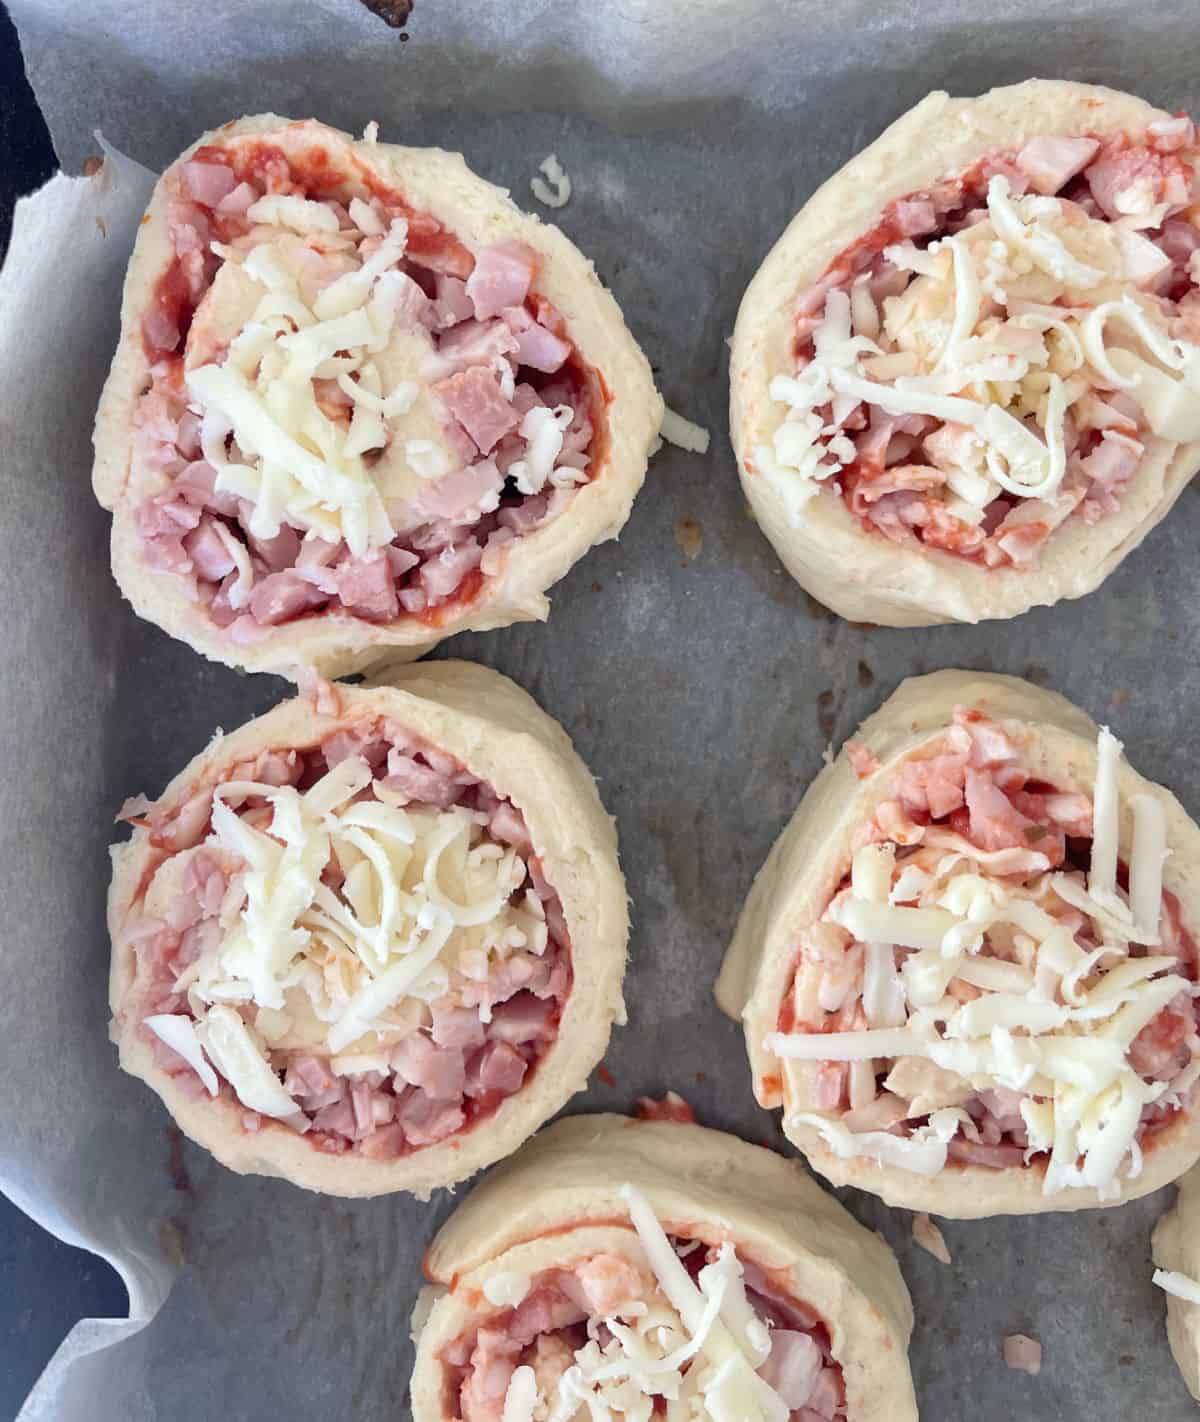 Uncooked Pizza Scrolls sitting on a lined baking tray.